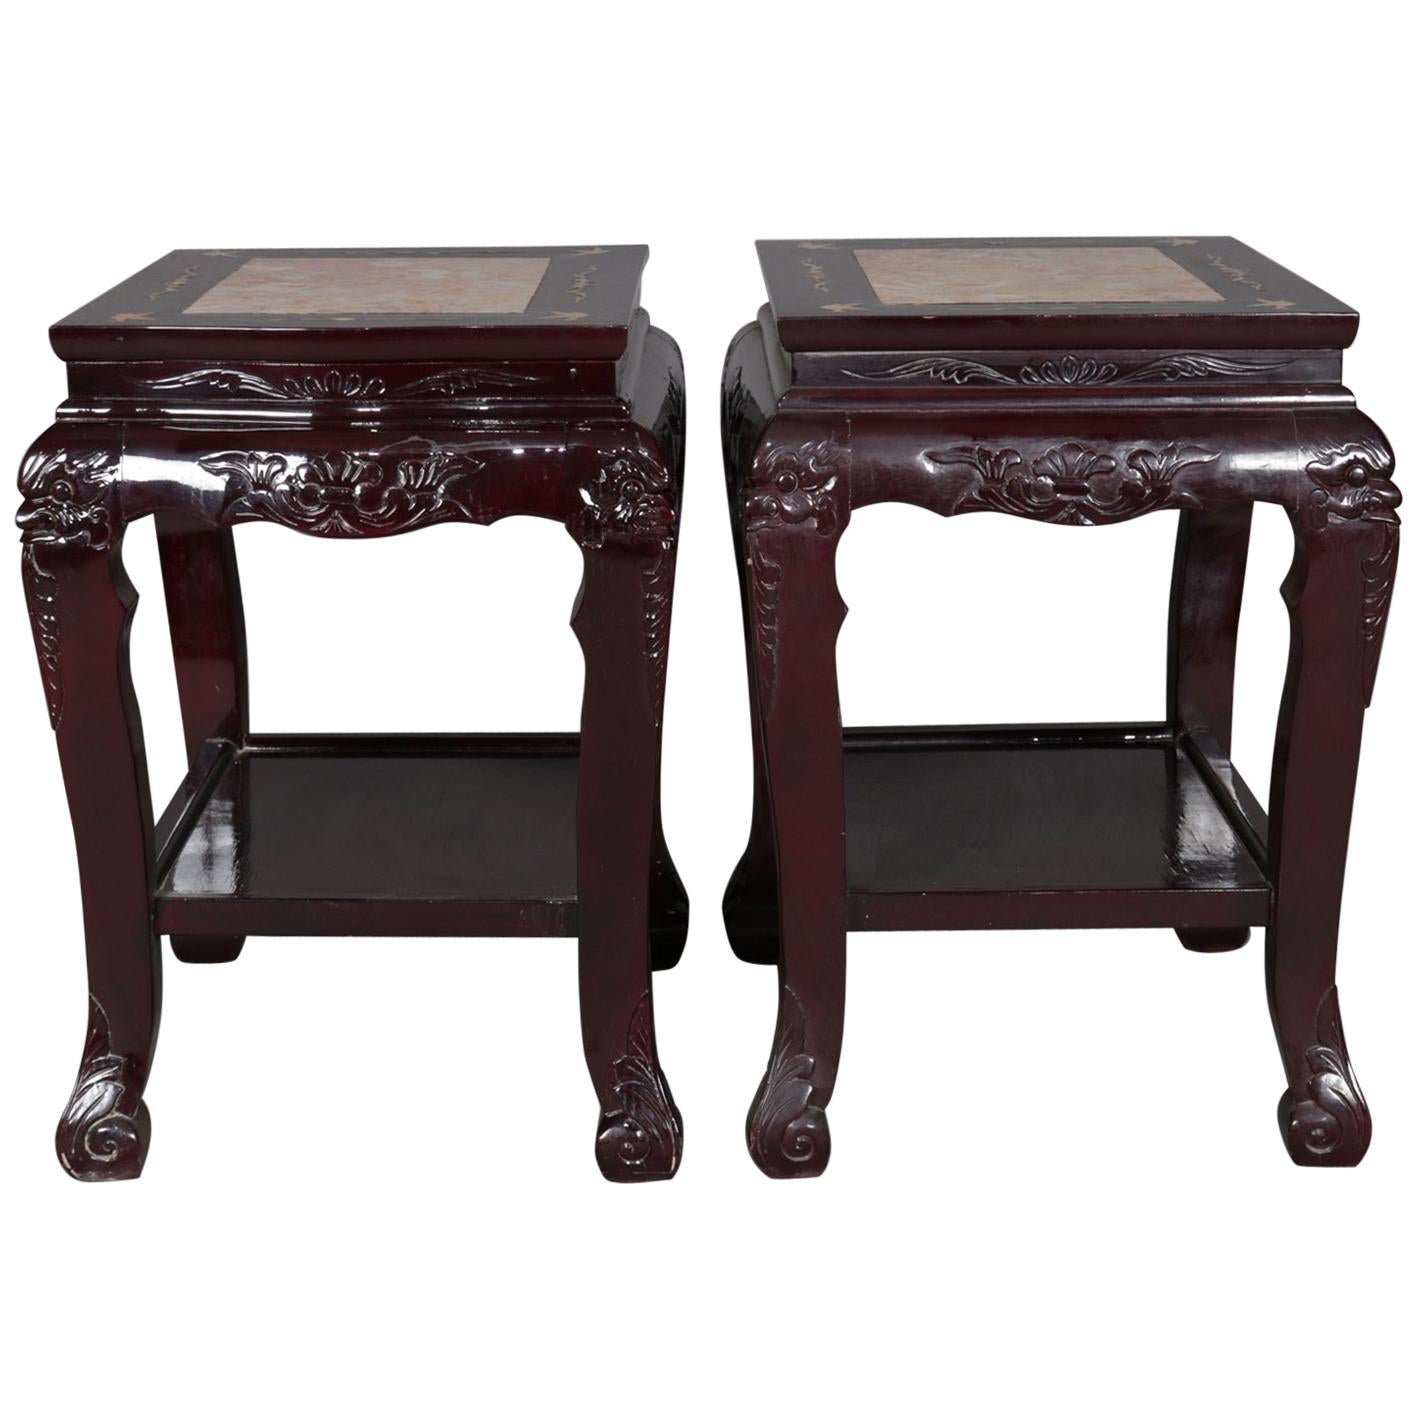 Figural Chinese Mother of Pearl Inlaid Carved Hardwood Marble-Top Tables